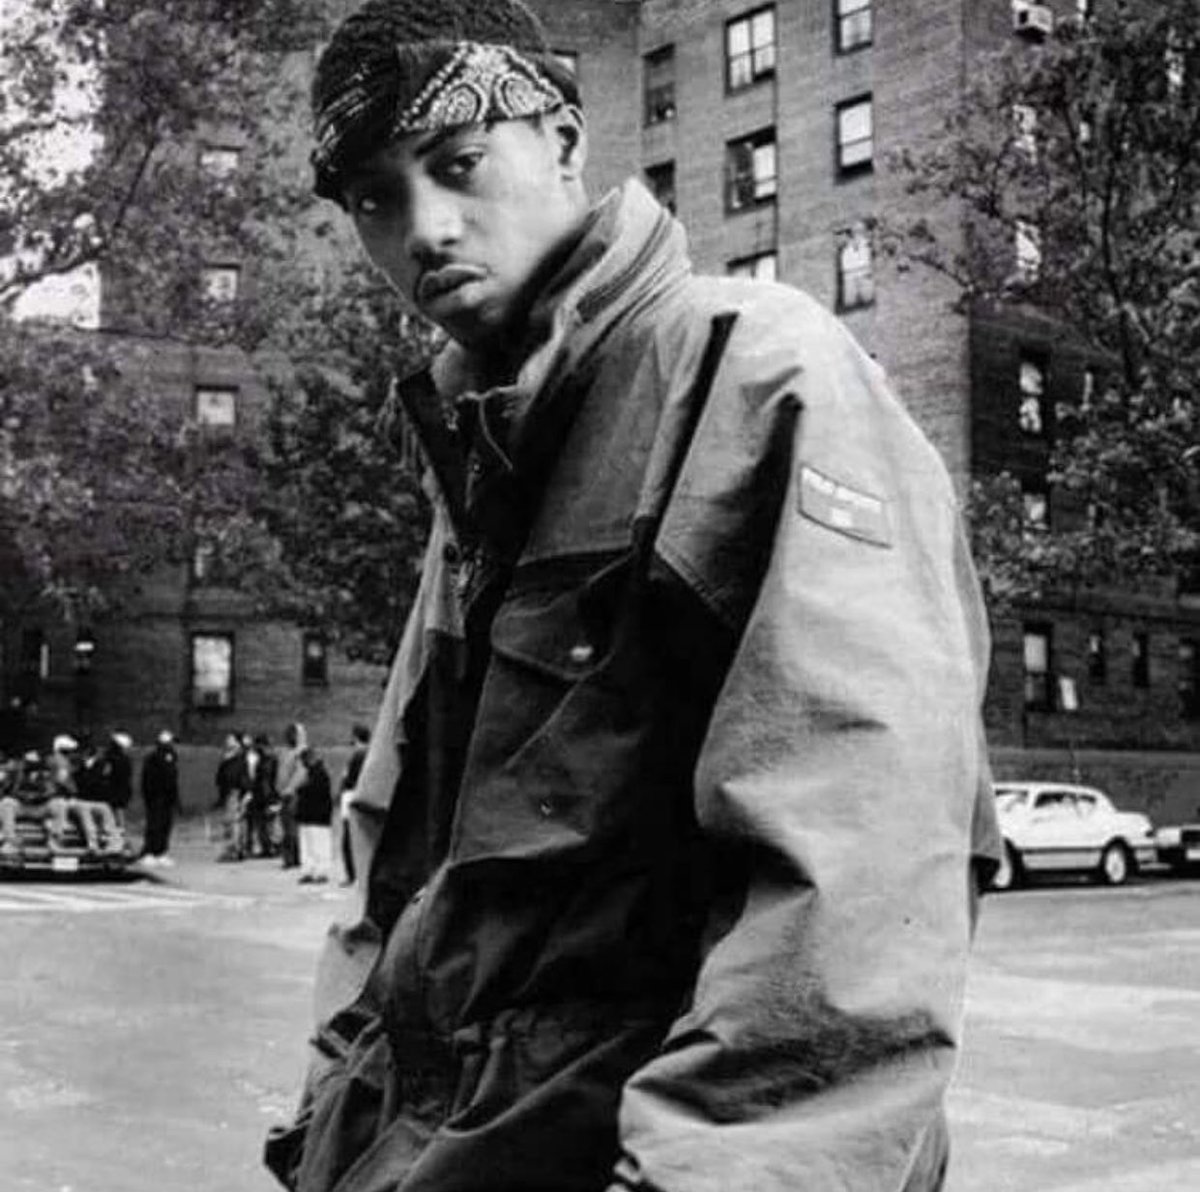 #greatness #90s #hiphop #nas